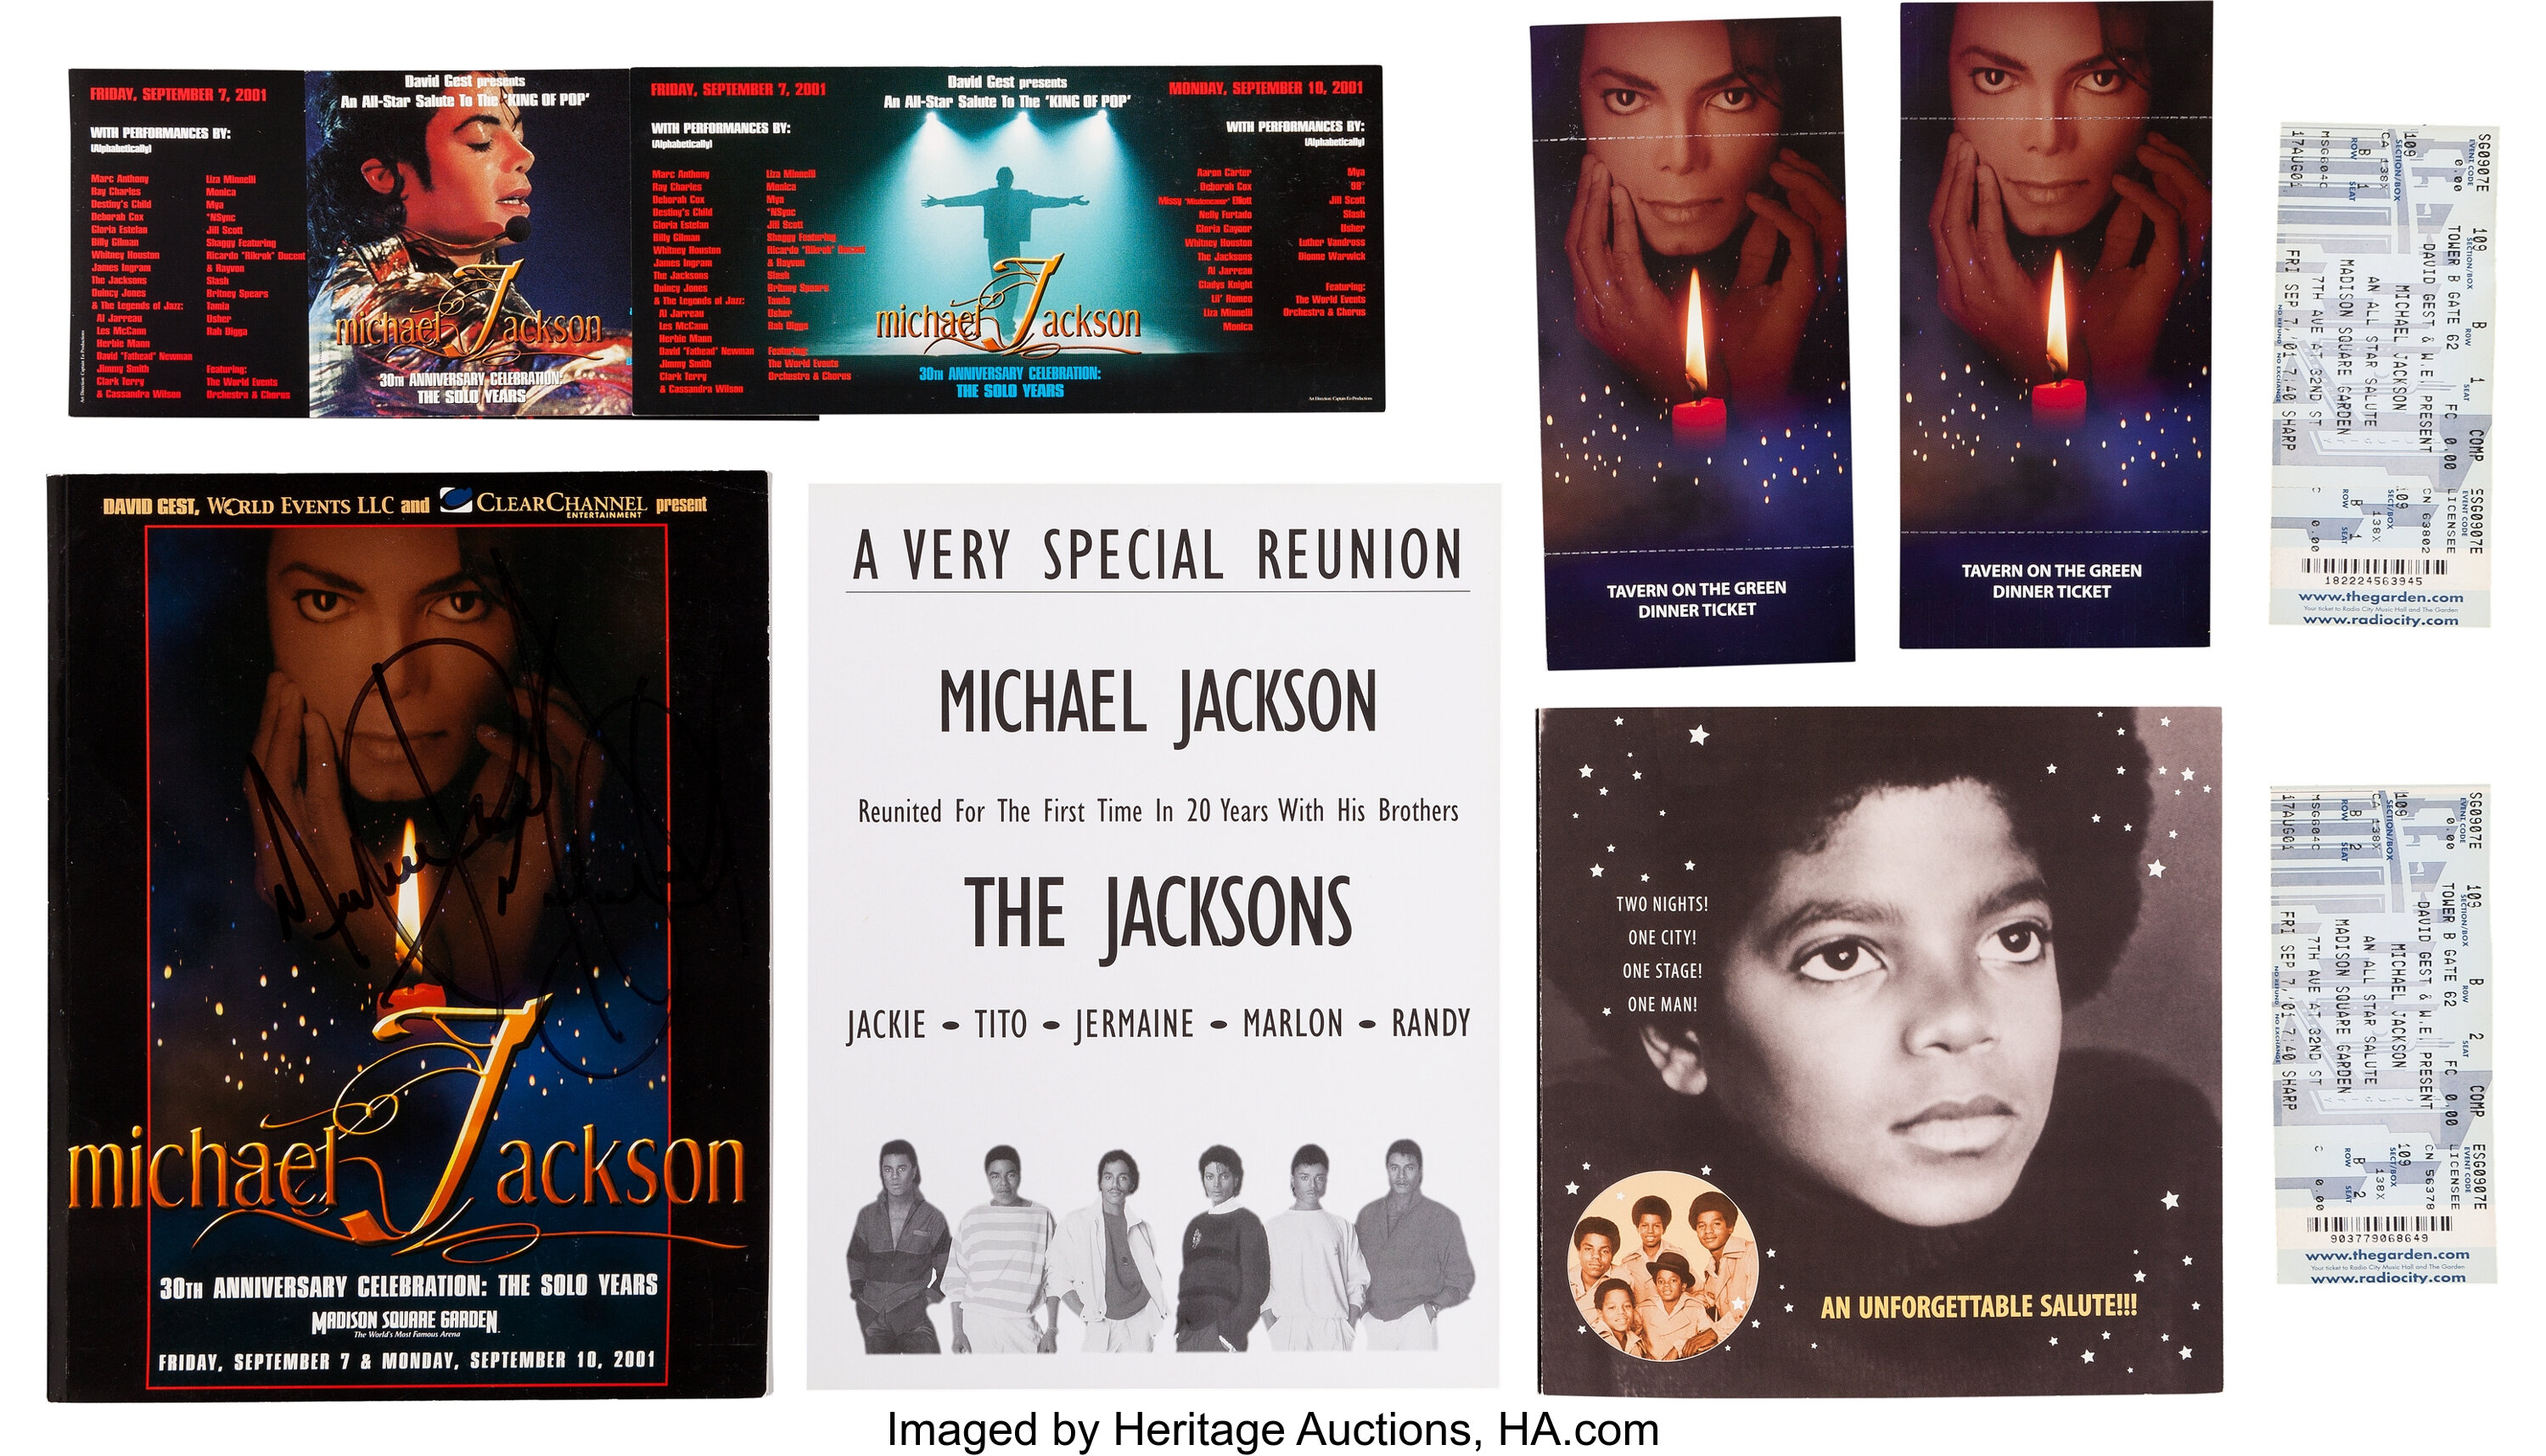 Michael Jackson Signed Concert Program With Tickets And